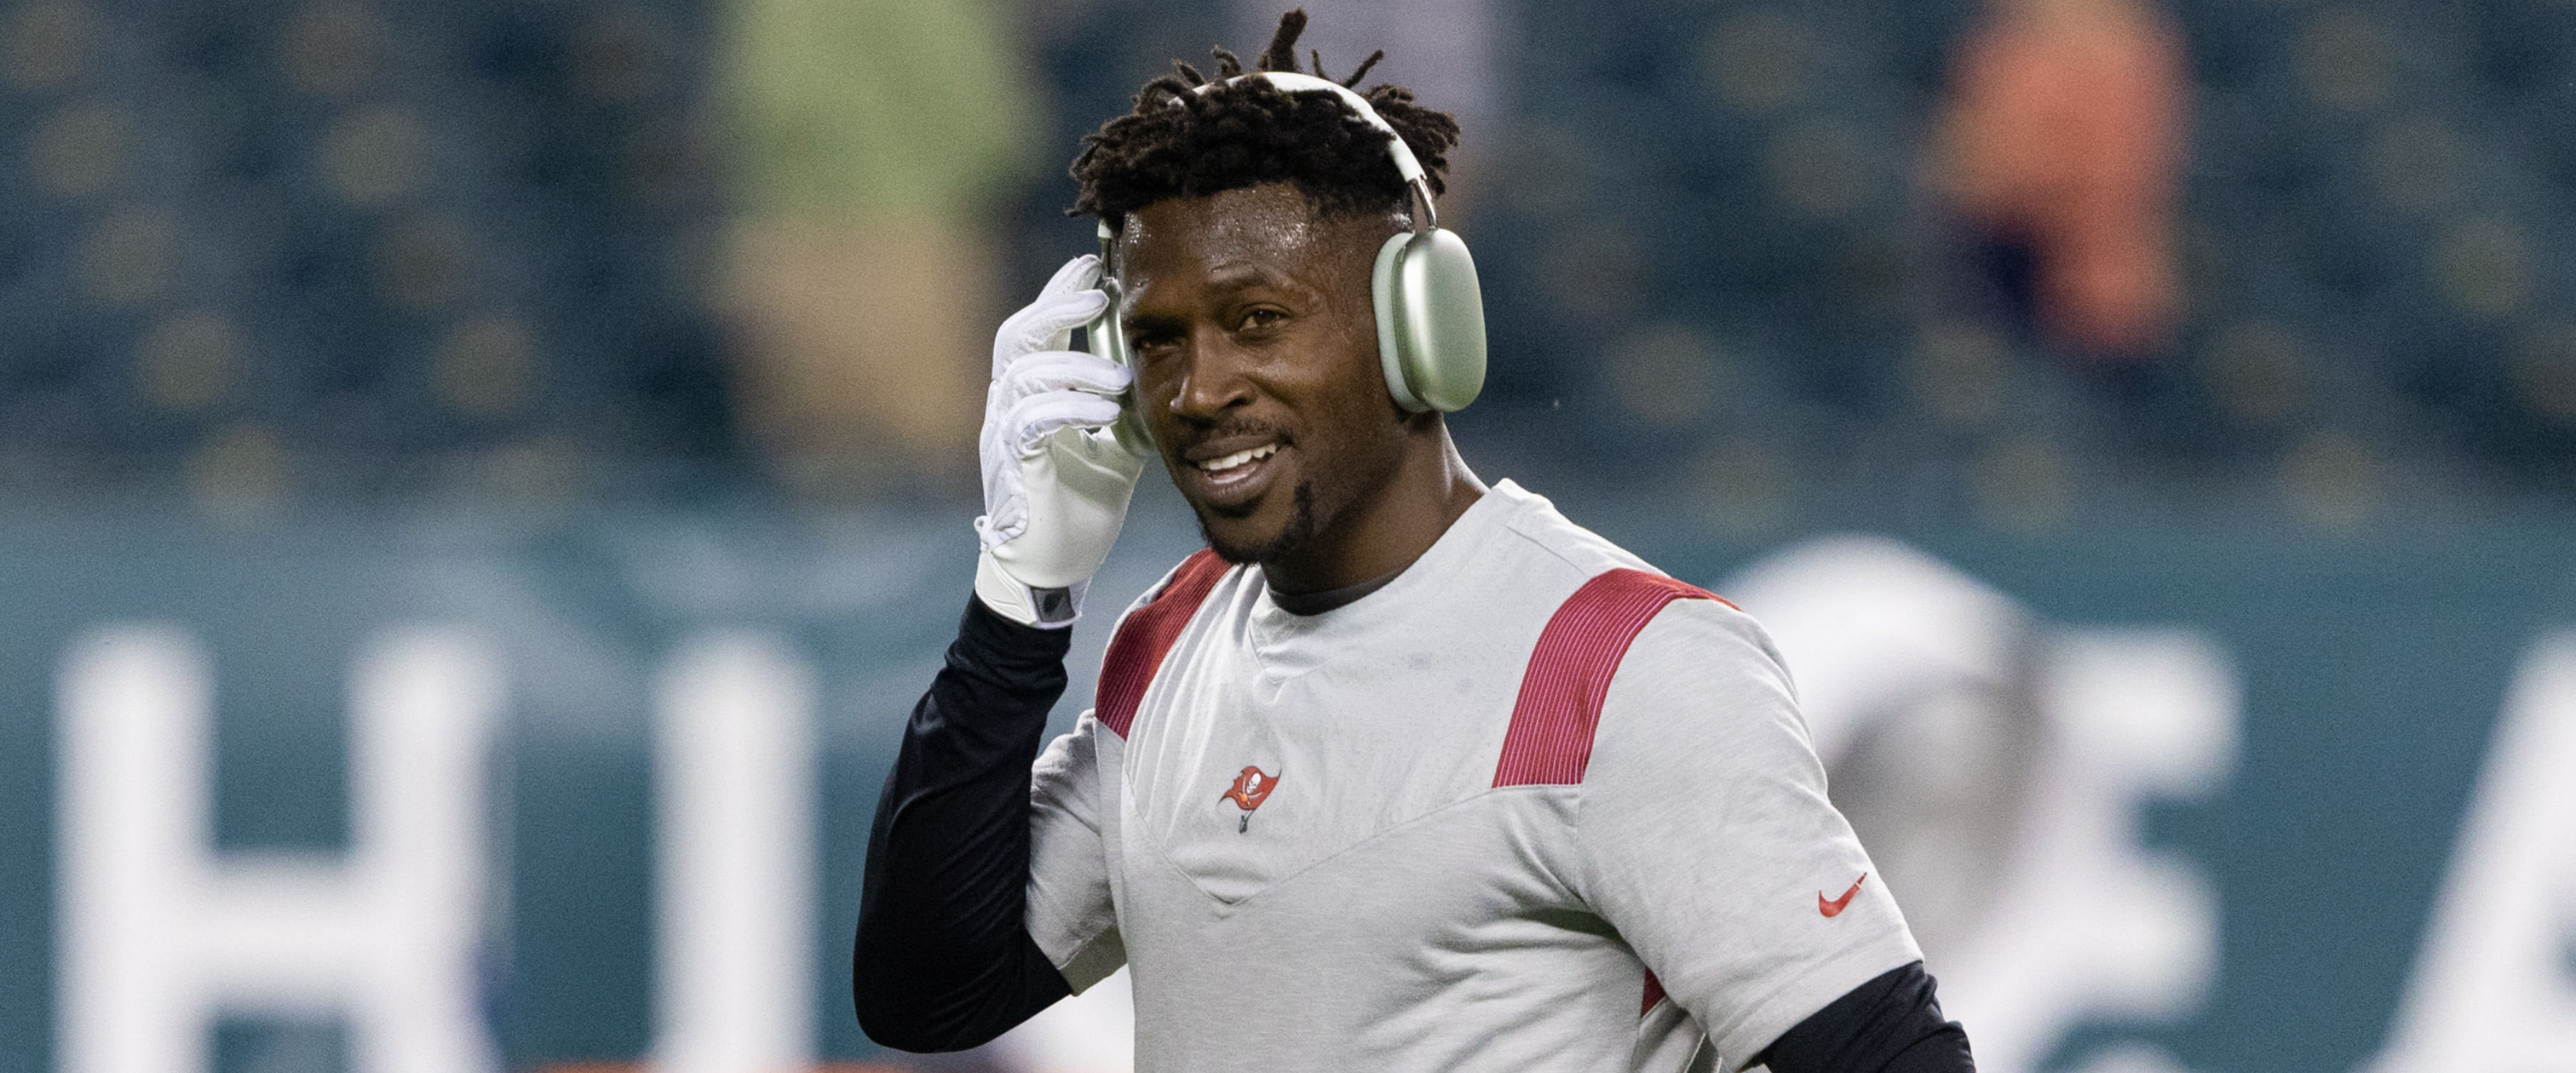 A timeline of events - Antonio Brown's extensive and puzzling off-field issues